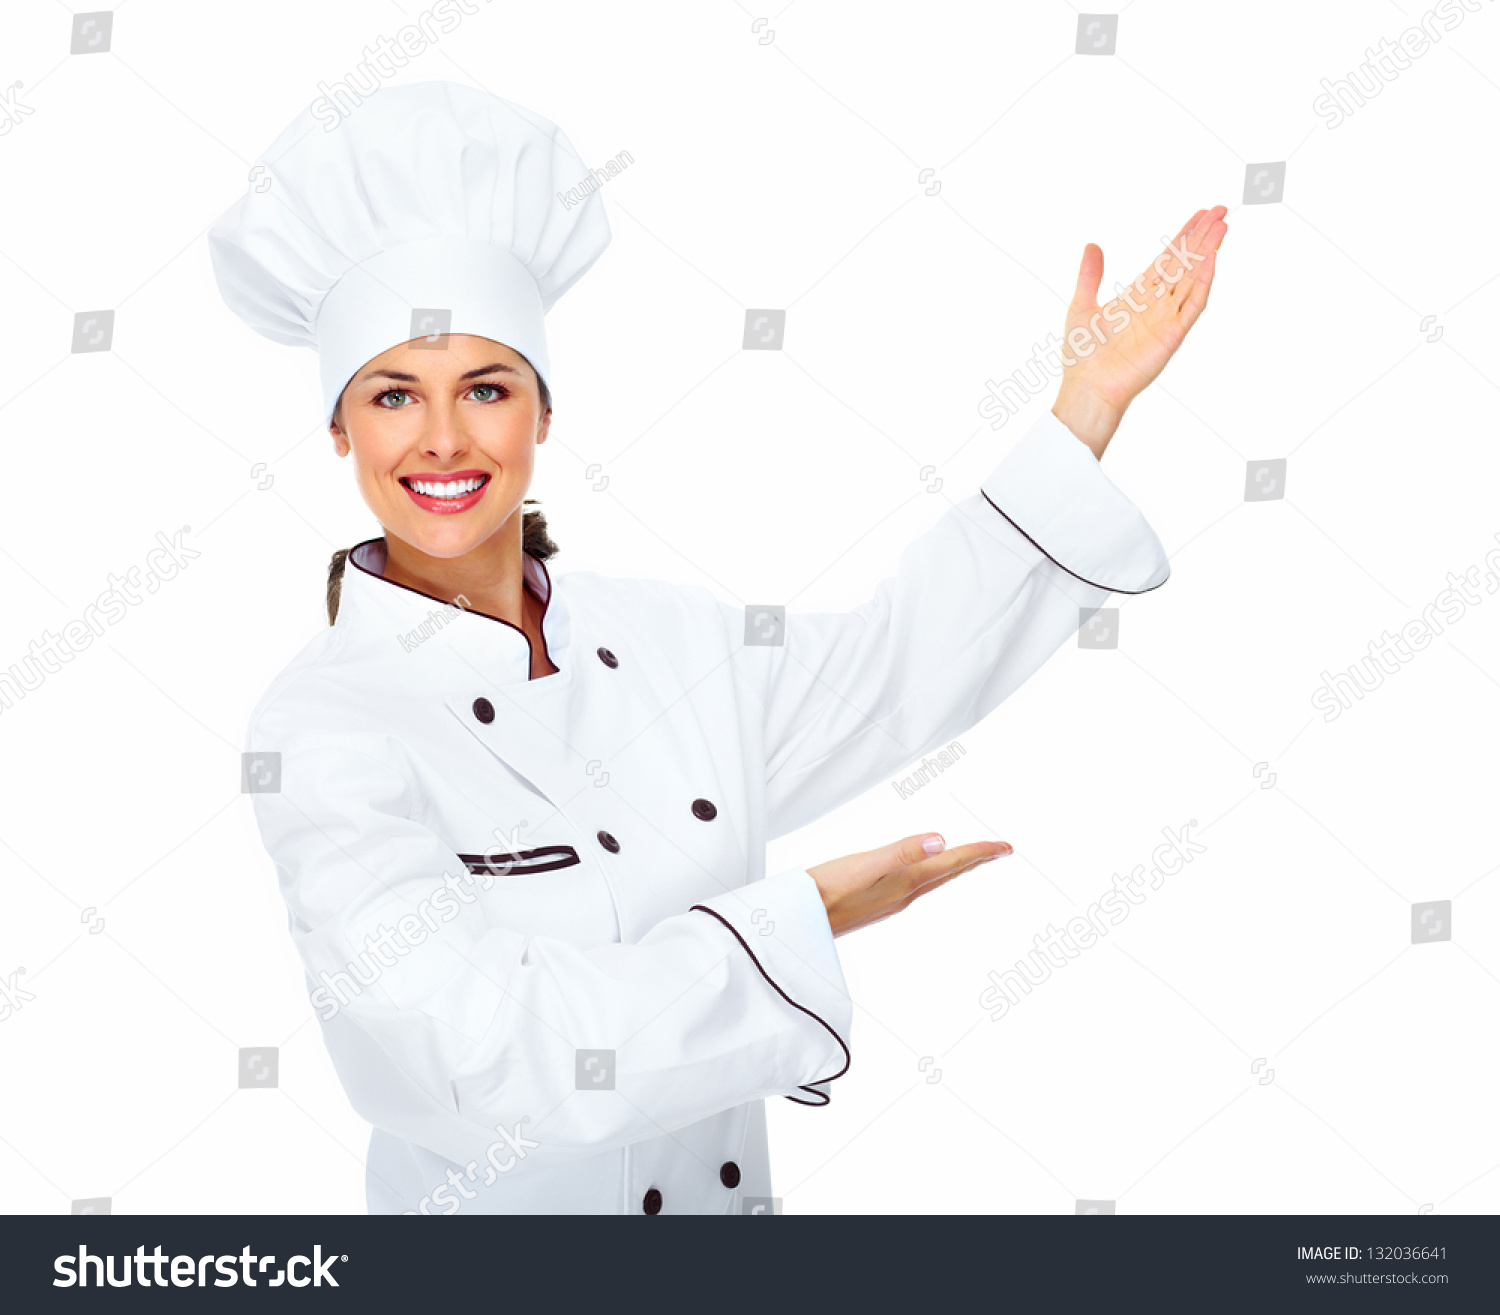 Chef Woman. Isolated Over White Background Stock Photo 132036641 ...